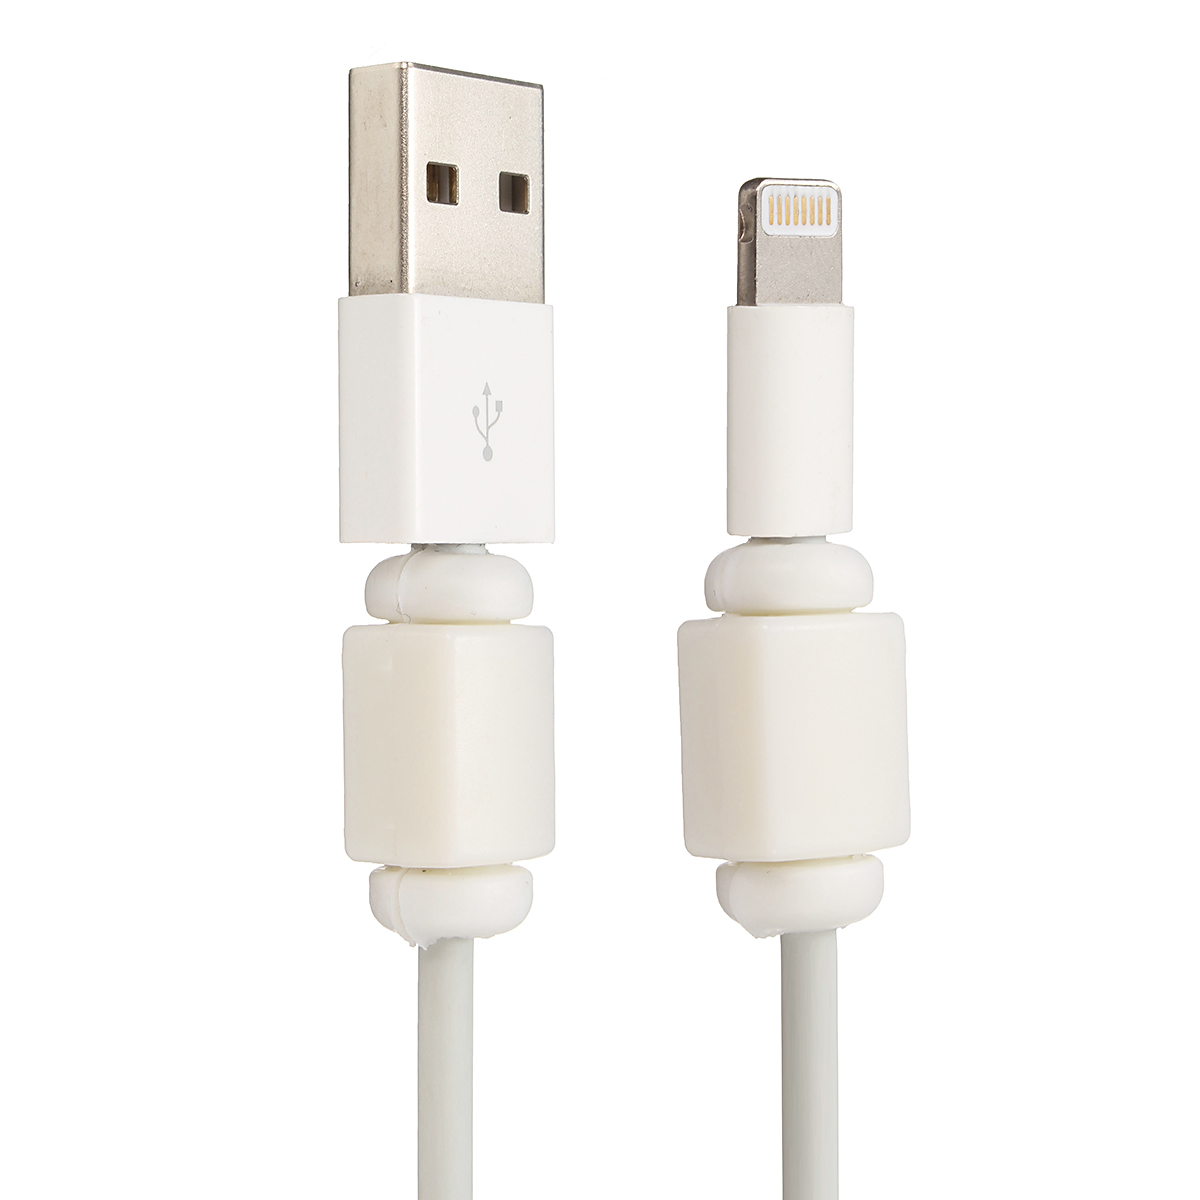 Digital-Cable-Line-Cord-Protecotor-Charger-Saver-For-iPhone-7-Samsung-Xiaomi-1123545